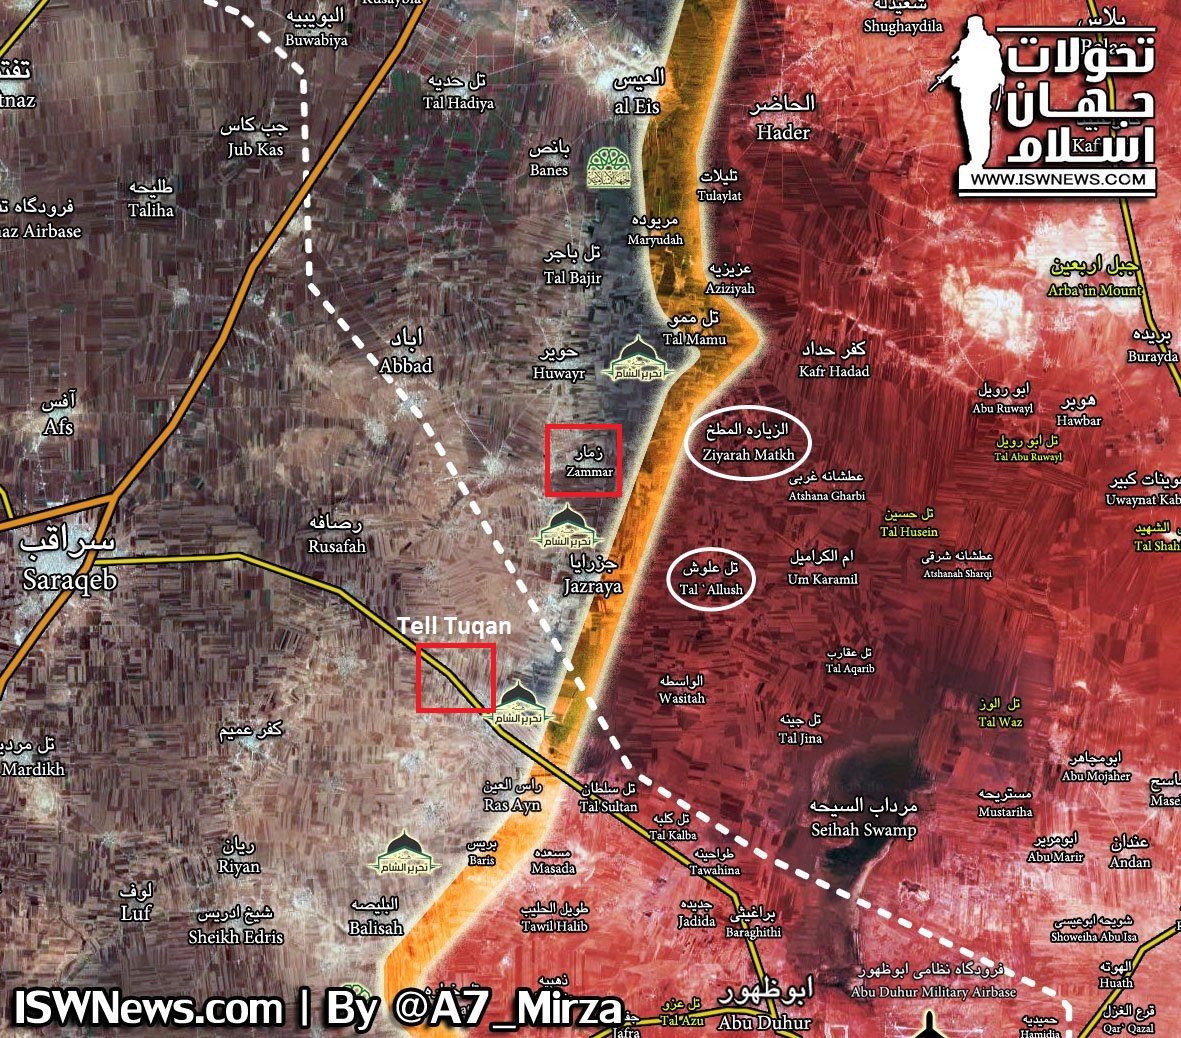 Syrian Army Captures 5 Villages, Deploys Within Only 10km Of Saraqib City In Idlib Province